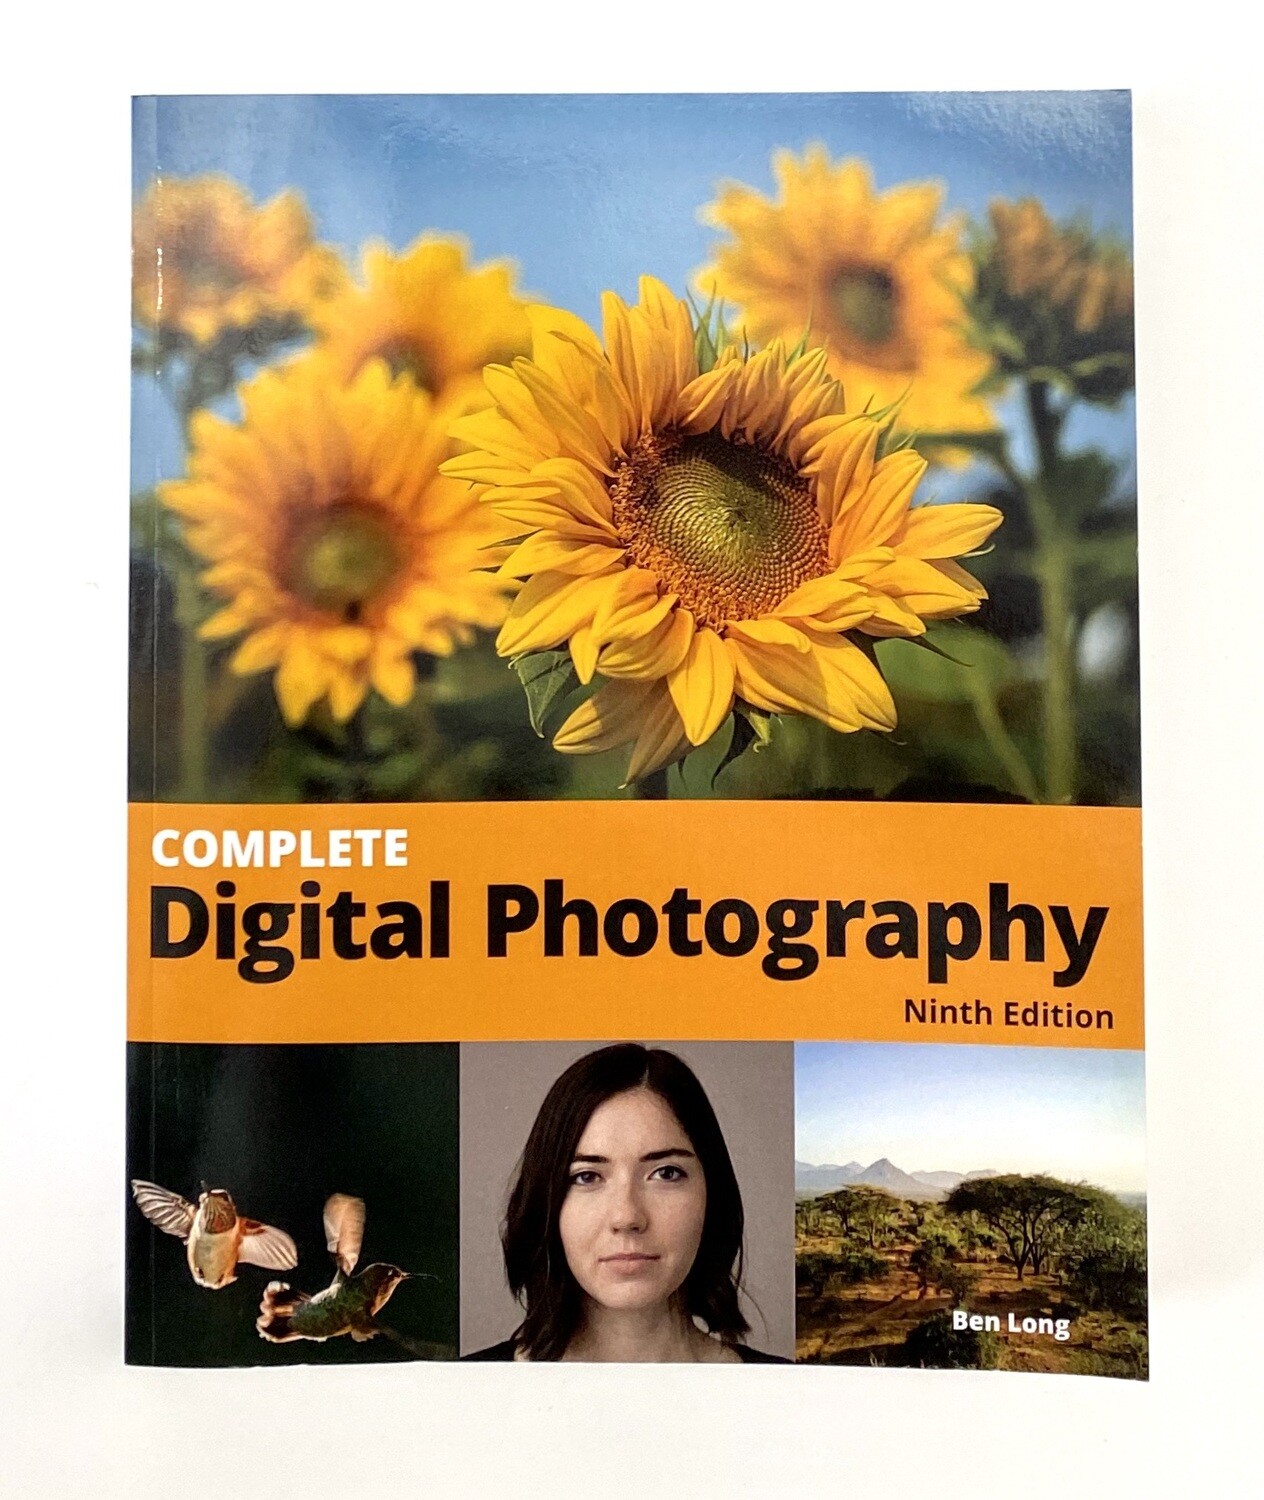 NEW - Complete Digital Photography 9th edition, Ben Long